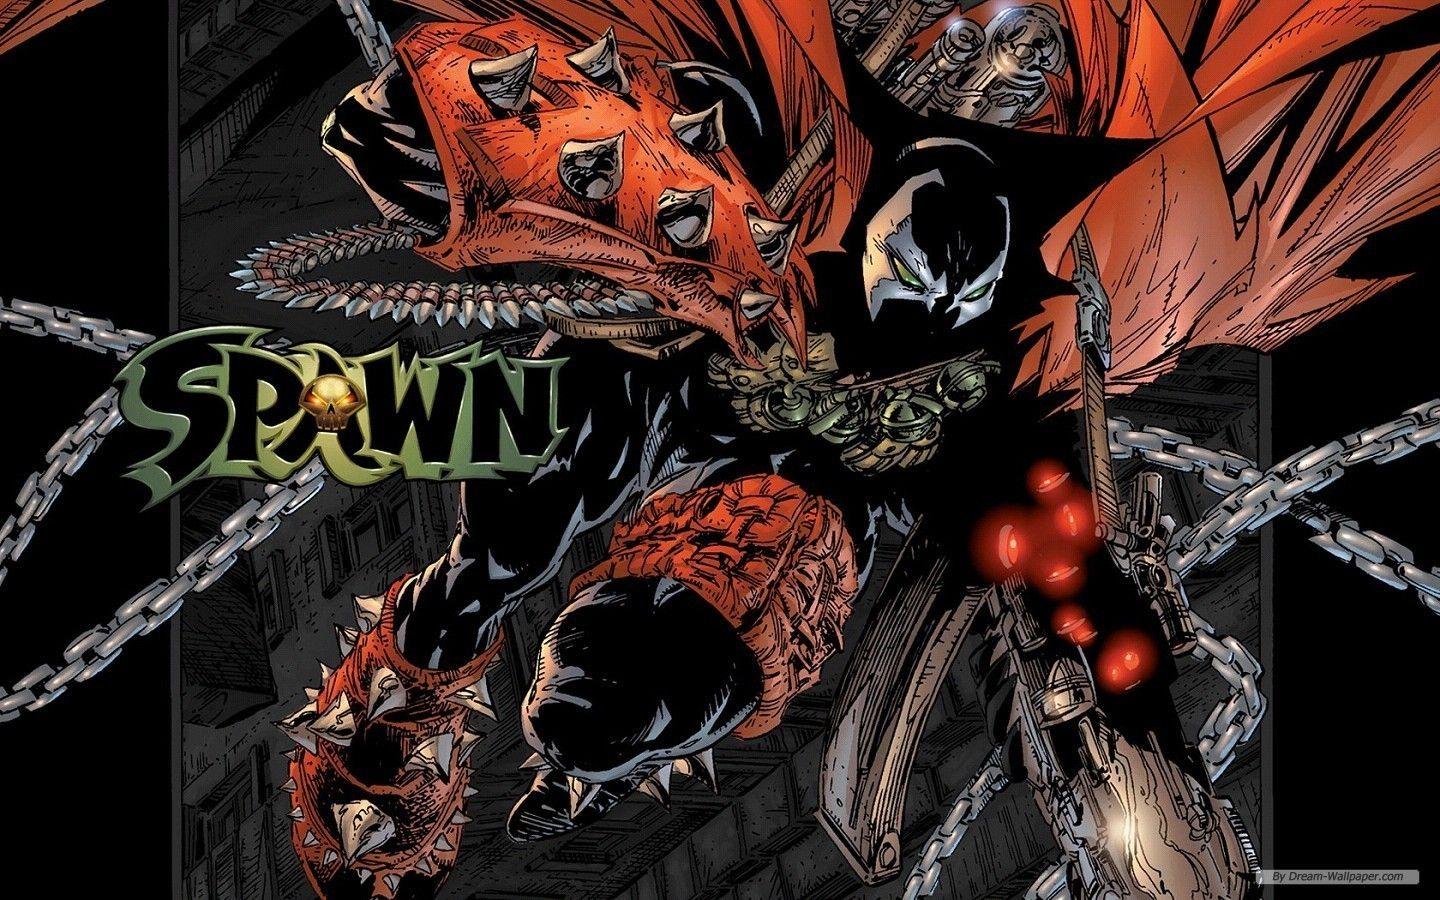 Todd McFarlane's Spawn image spawn HD wallpaper and background